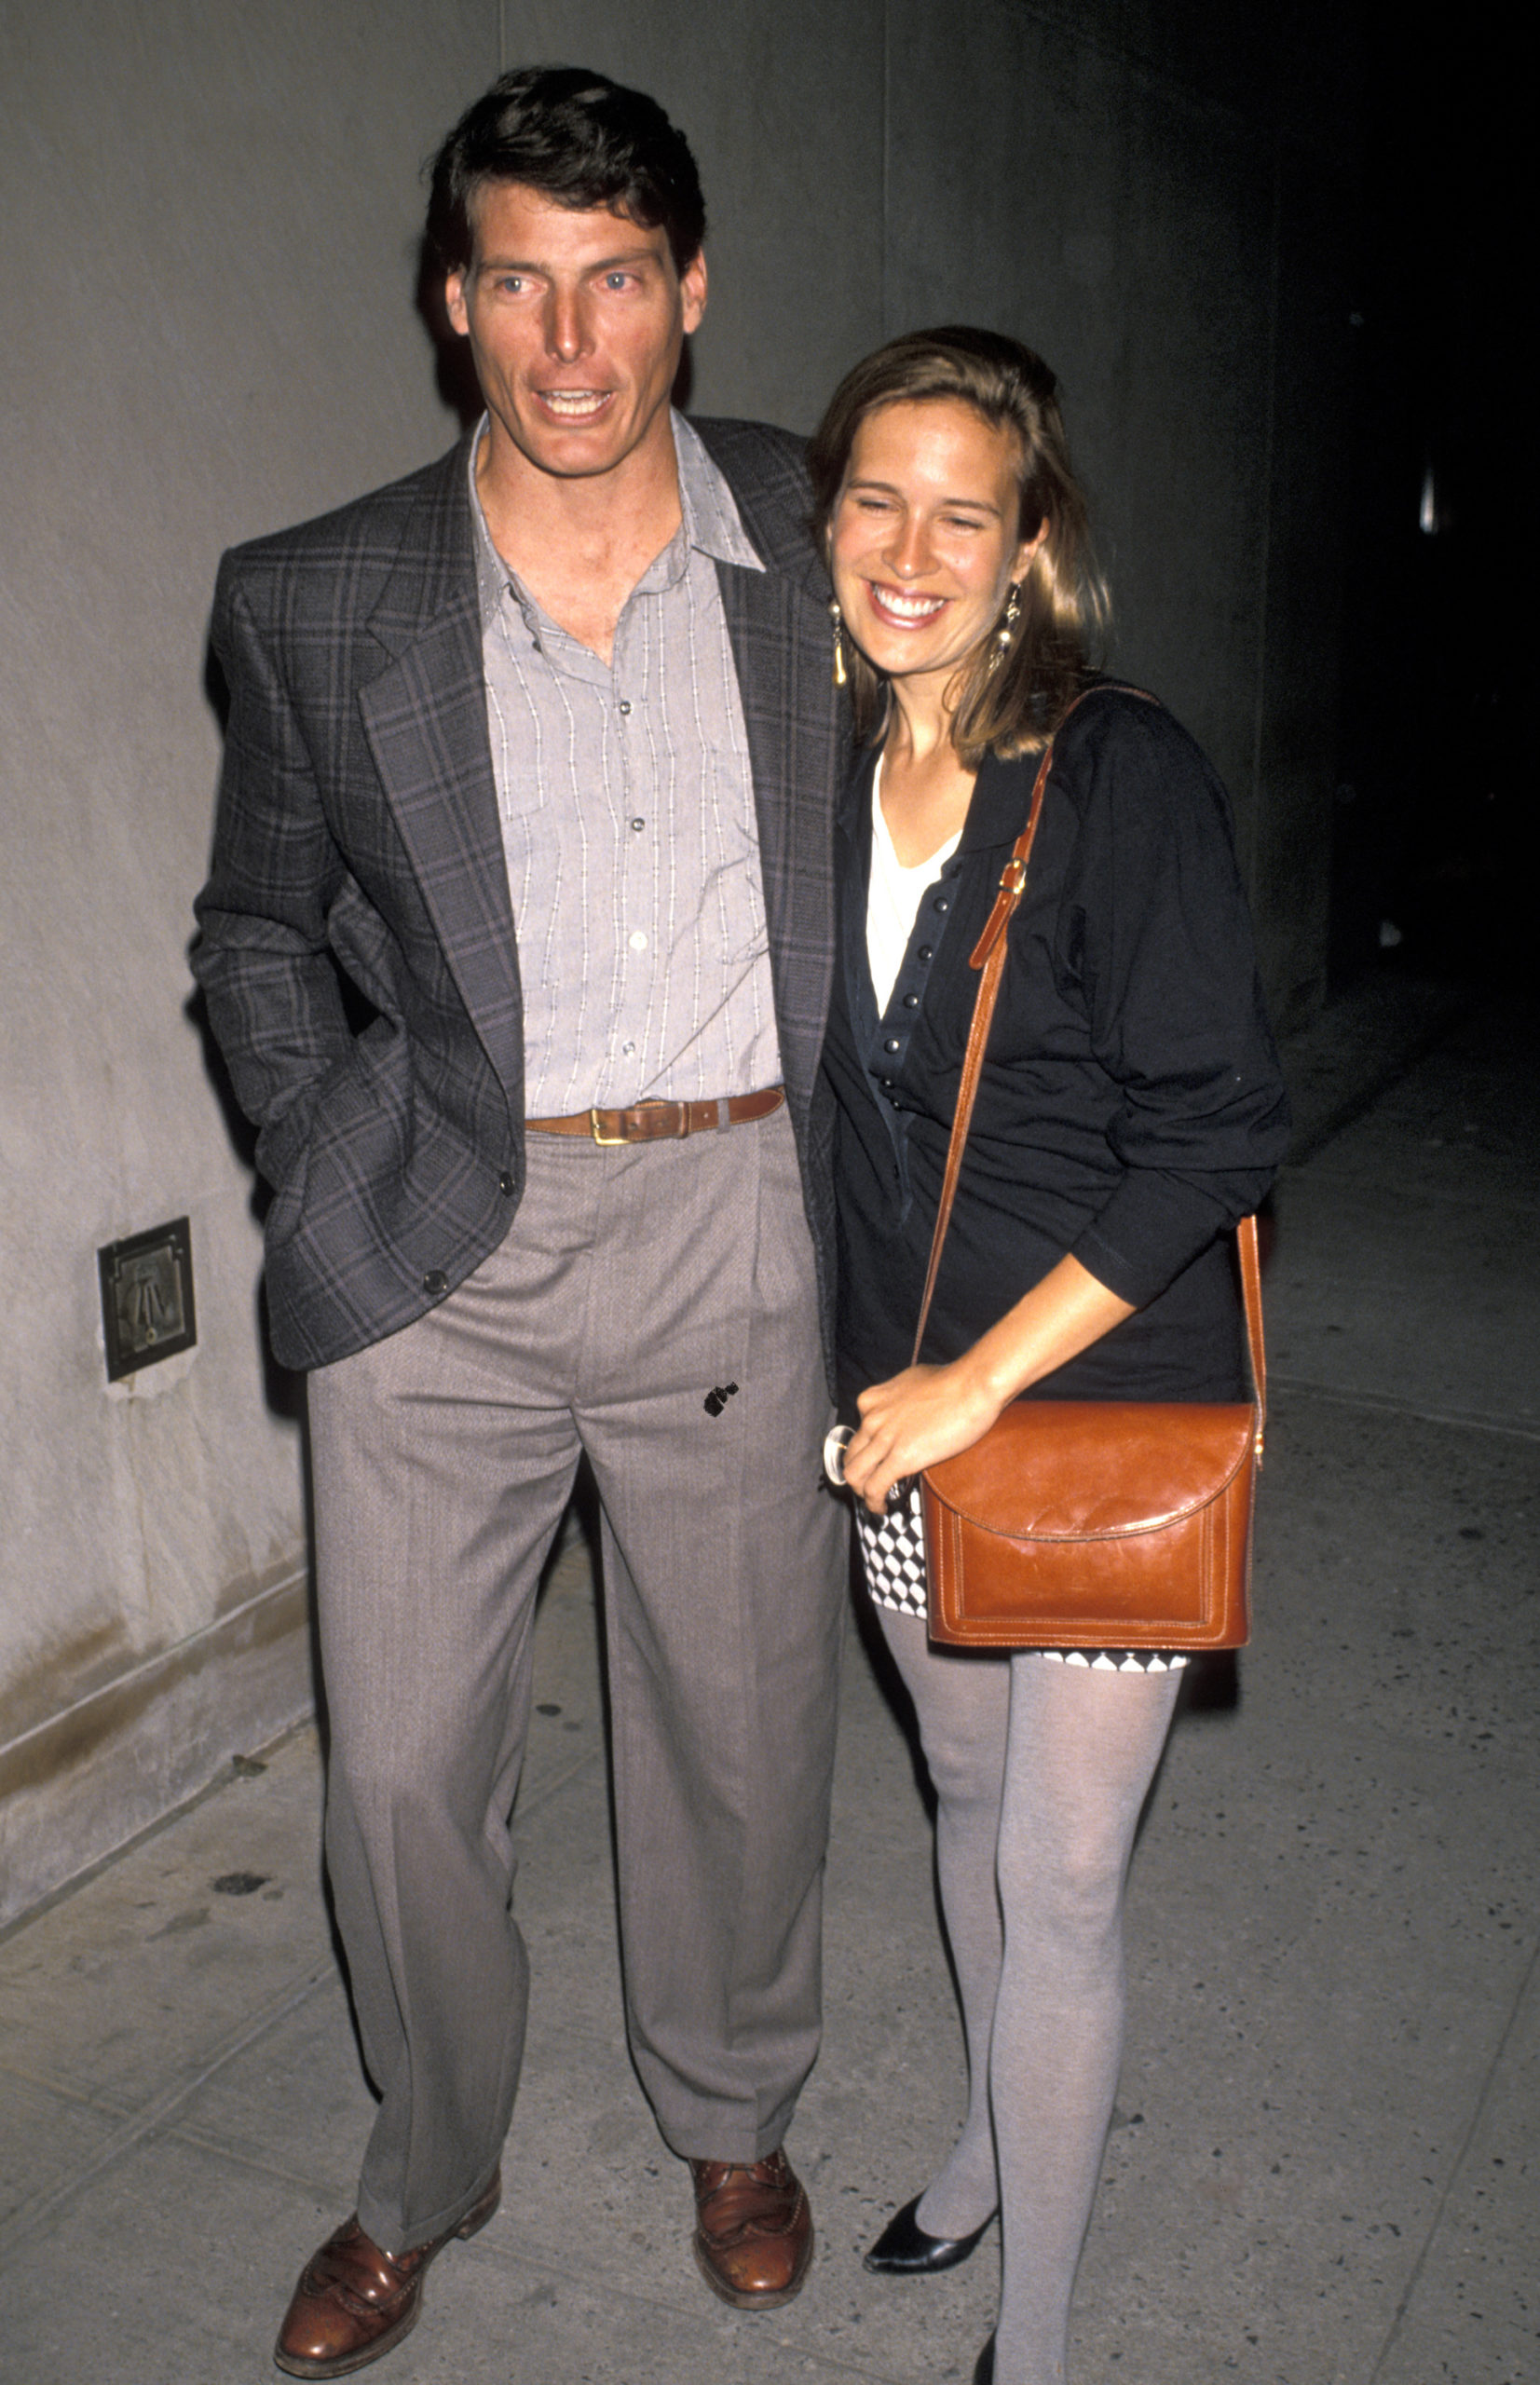 Christopher Reeve and Dana Reeve Had Marriage Fear but Still Wed and Stayed Together till His Death!